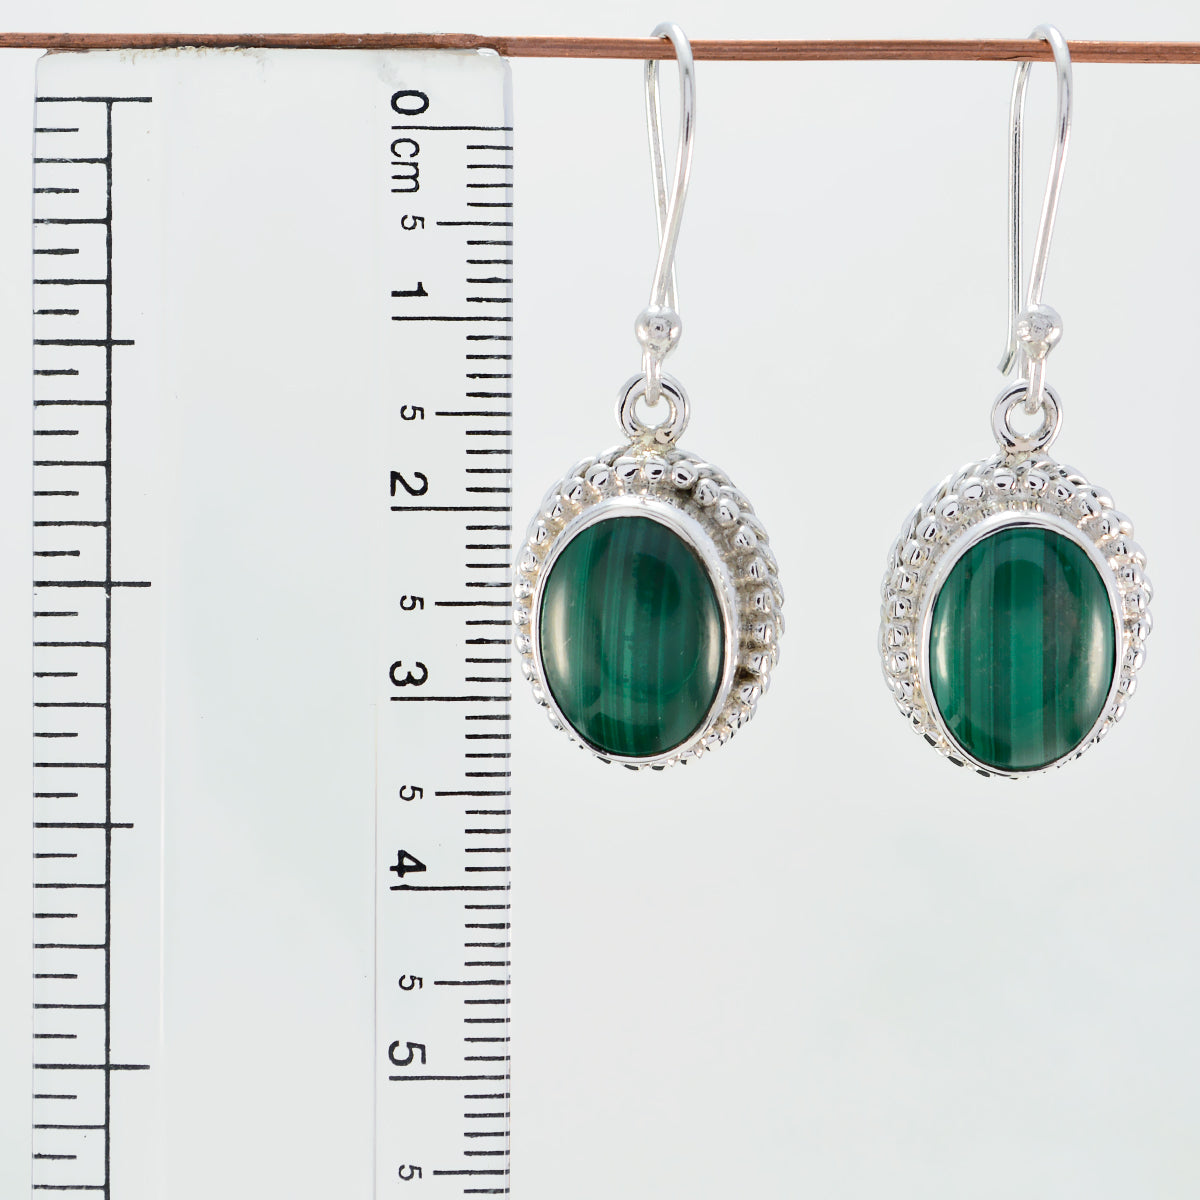 Riyo Nice Gemstone round Cabochon Green Malachatie Silver Earrings gift for labour day